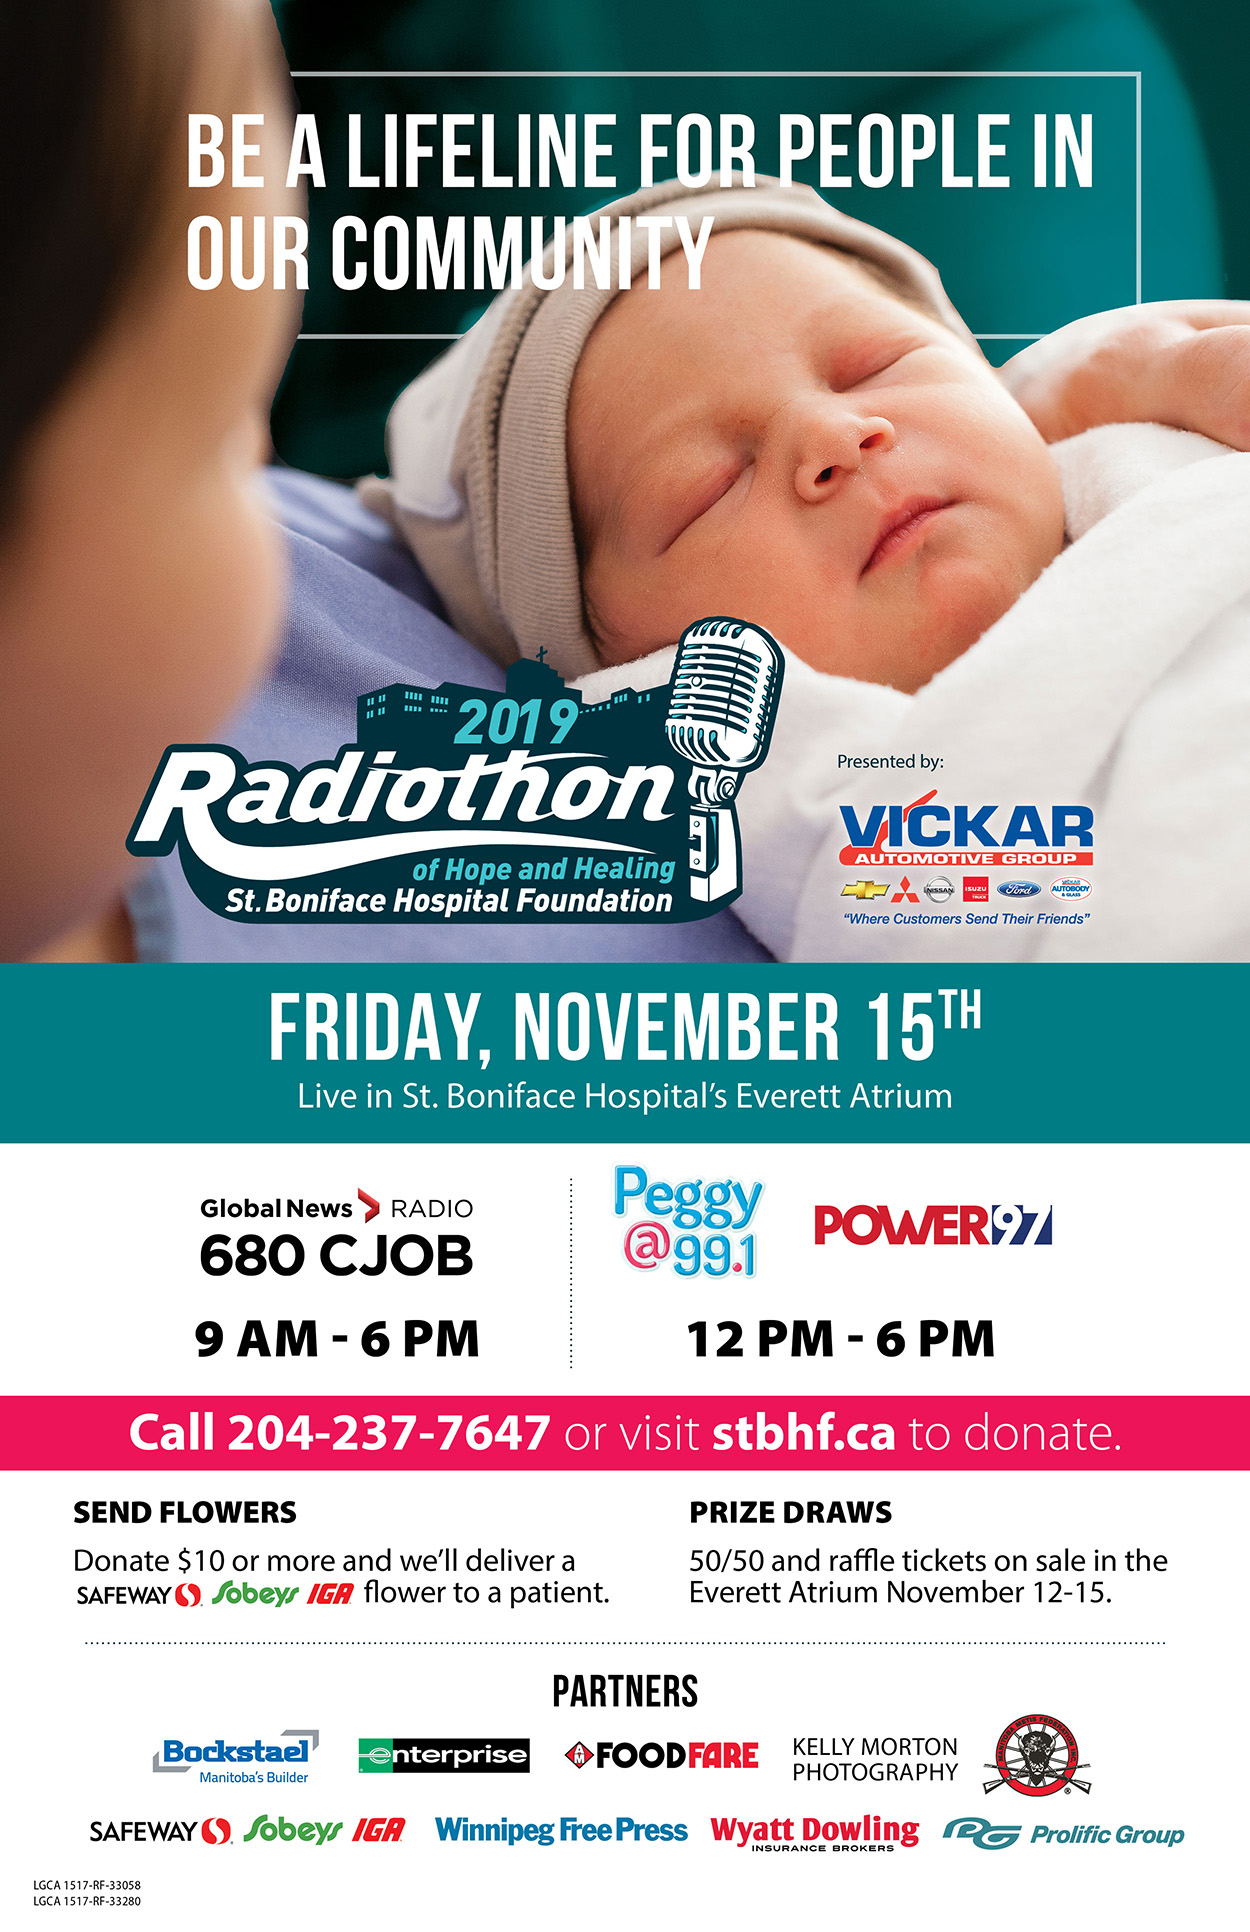 Mother holding baby with text "Be a lifeline for people in our community" - 2019 Radiothon Ad